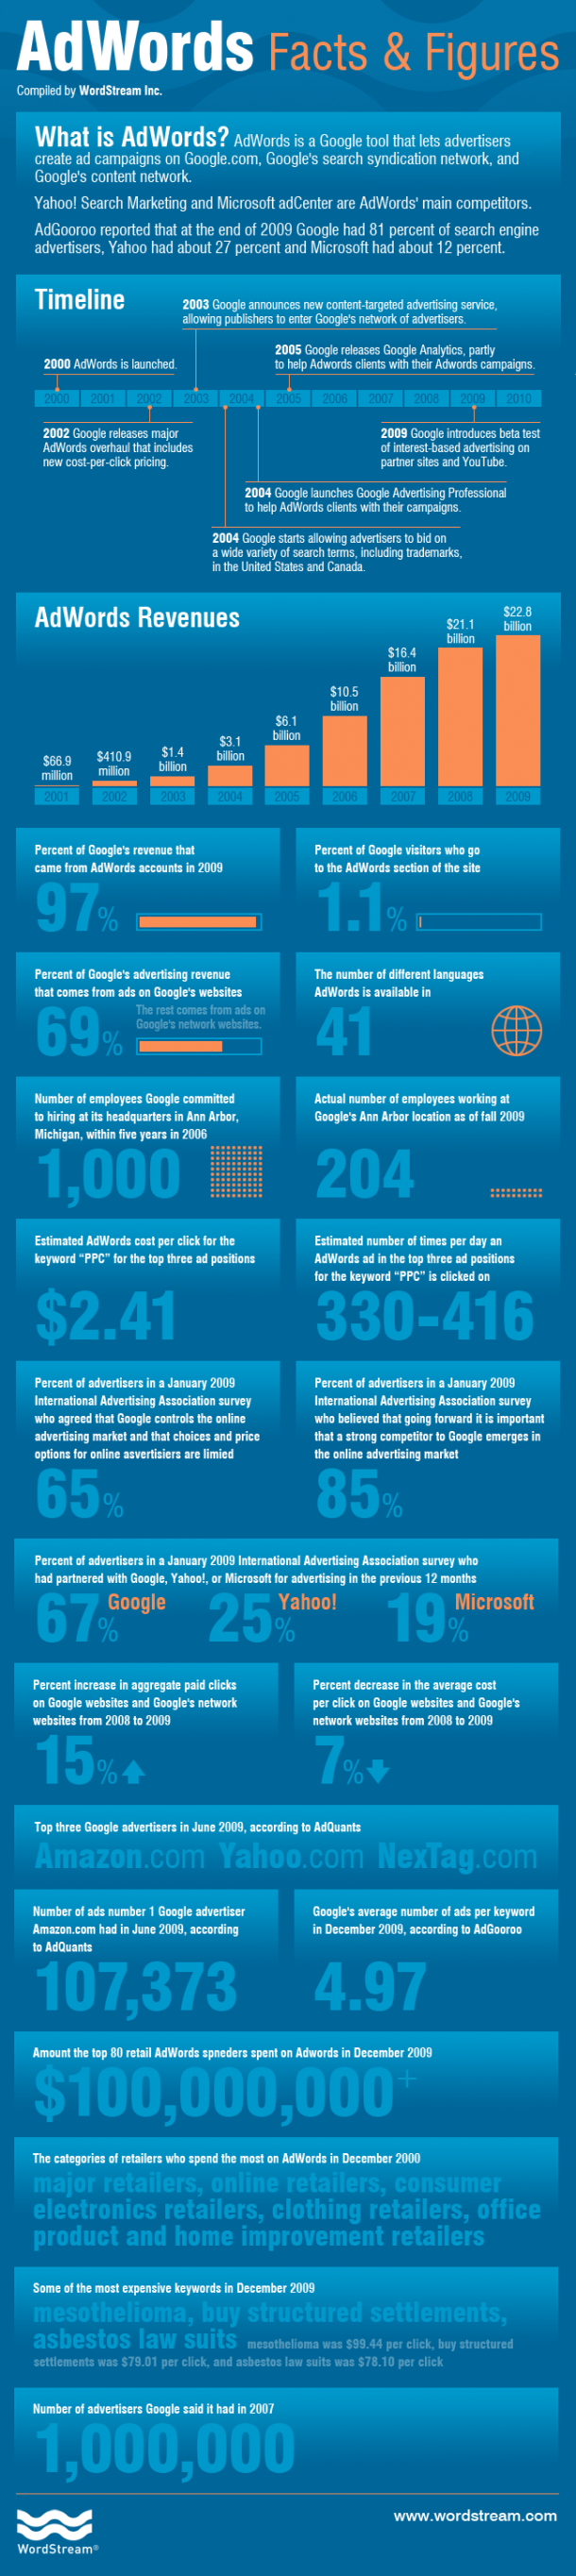 Google-Adwords-Facts-And-Figures-infographic